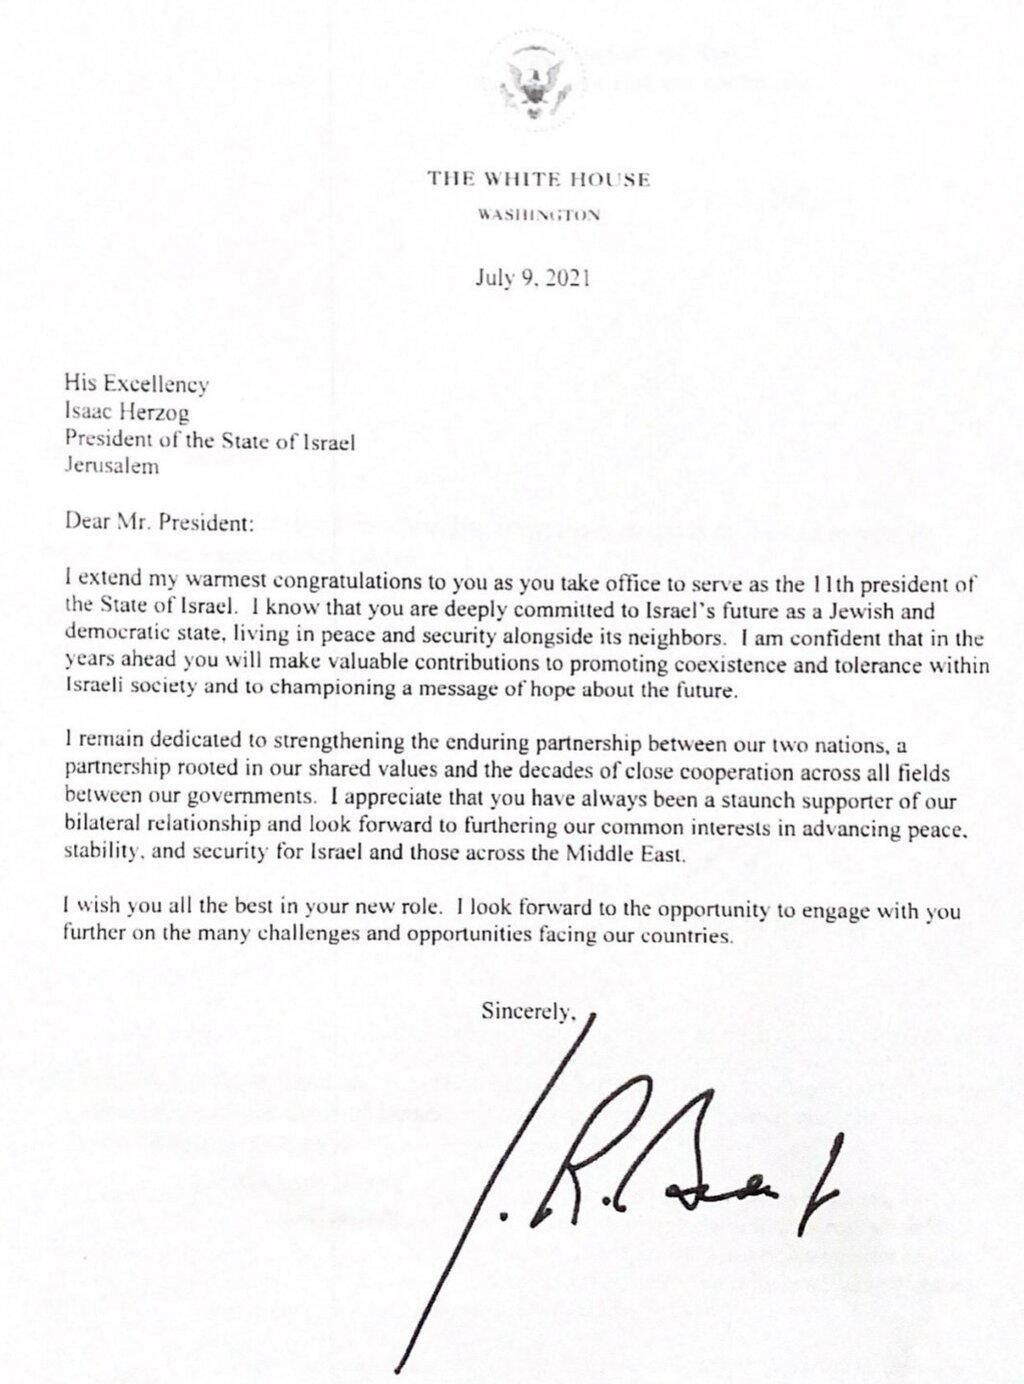 The letter sent by U.S. President Joe Biden to his newly elected Israeli counterpart Isaac Herzog, July 11, 2021 